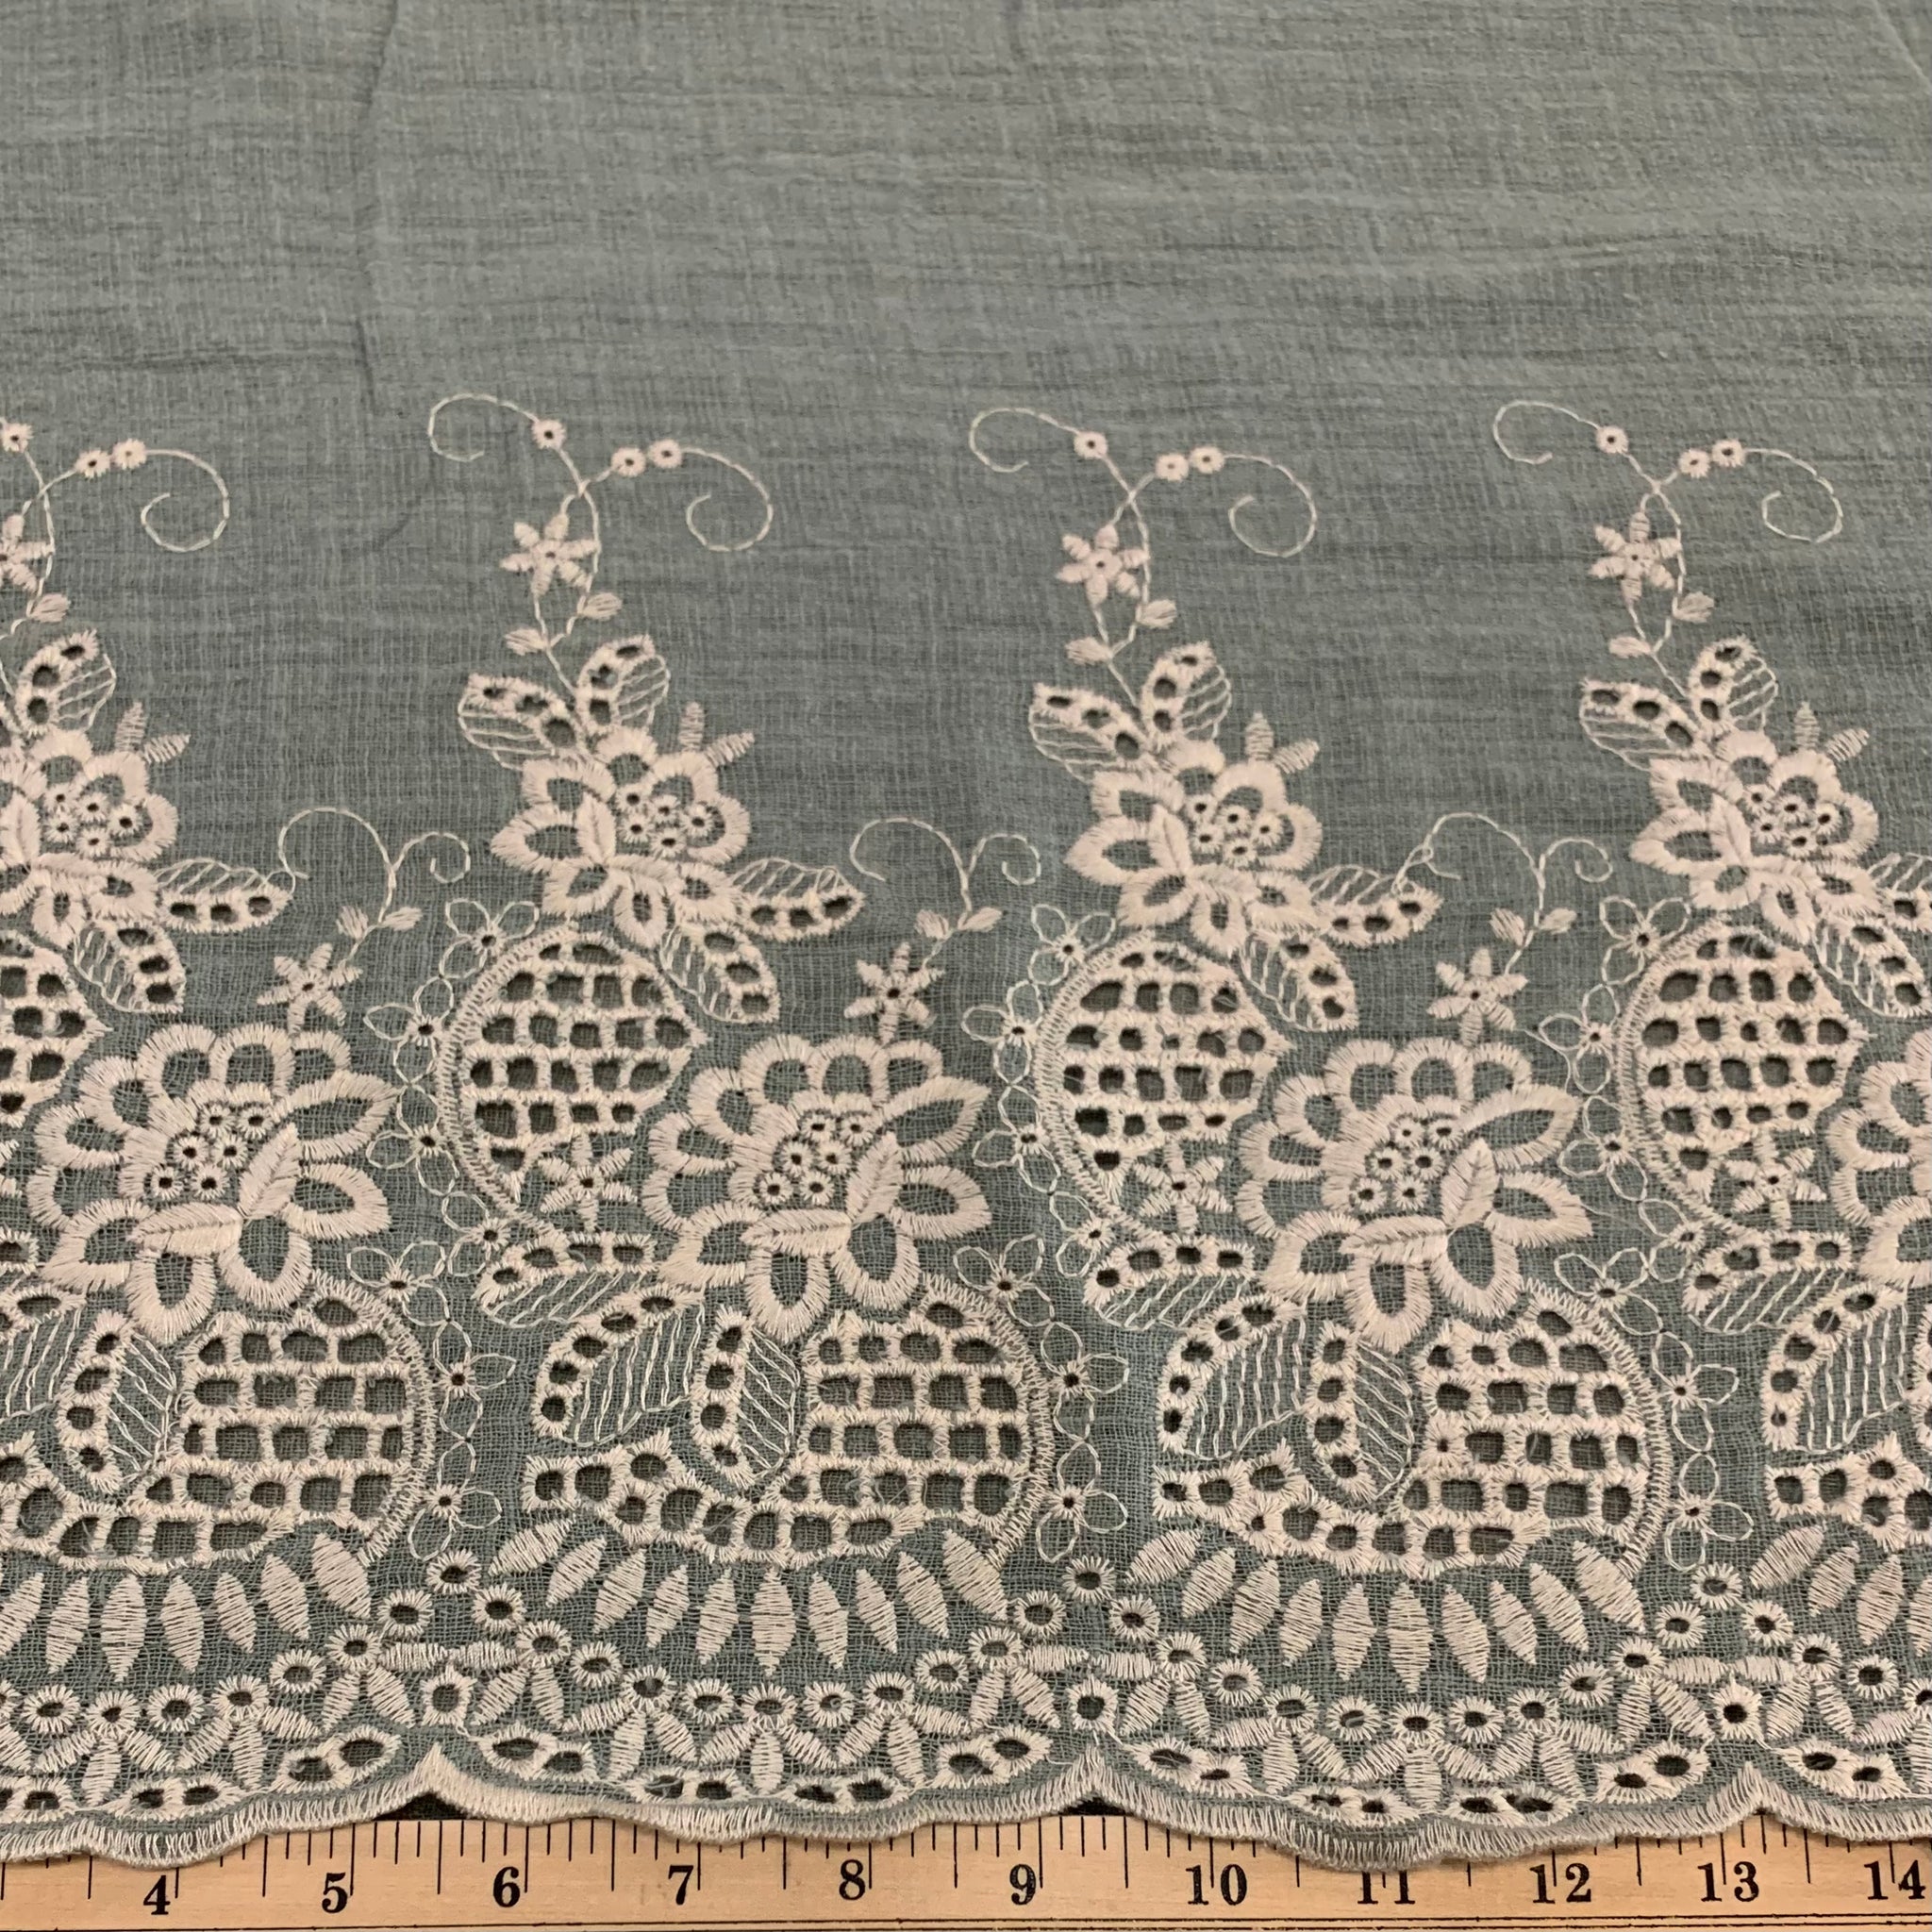 Embroidered Border Cotton Gauze Fabric - Dusty Teal/Grey